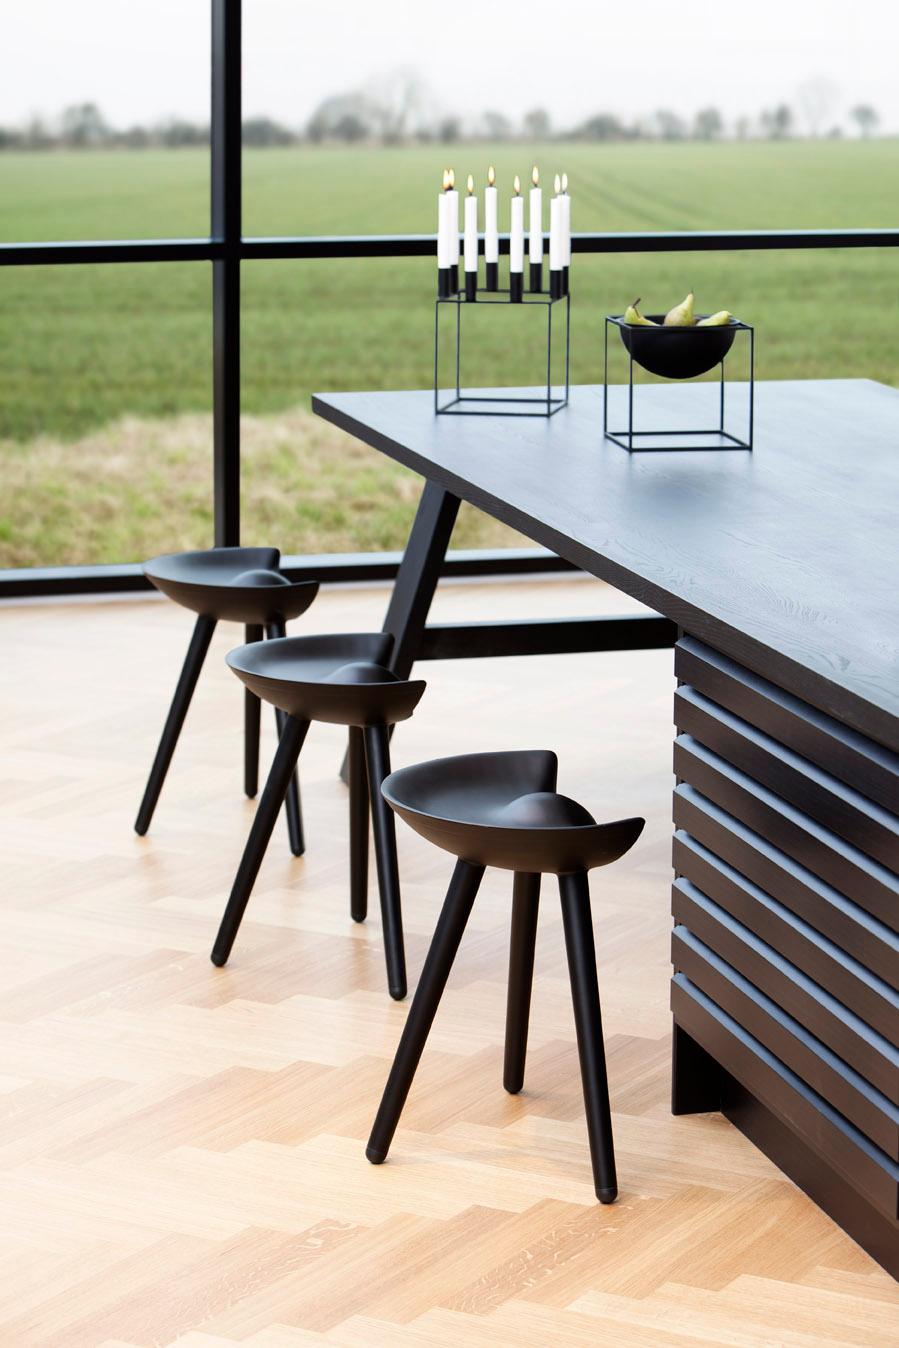 Black Beech Stool by Lassen
Dimensions: H 48 x W 36 x L 55.5 cm
Materials: Beech

In 1942 Mogens Lassen designed the Stool ML42 as a piece for a furniture exhibition held at the Danish Museum of Decorative Art. He took inspiration from the